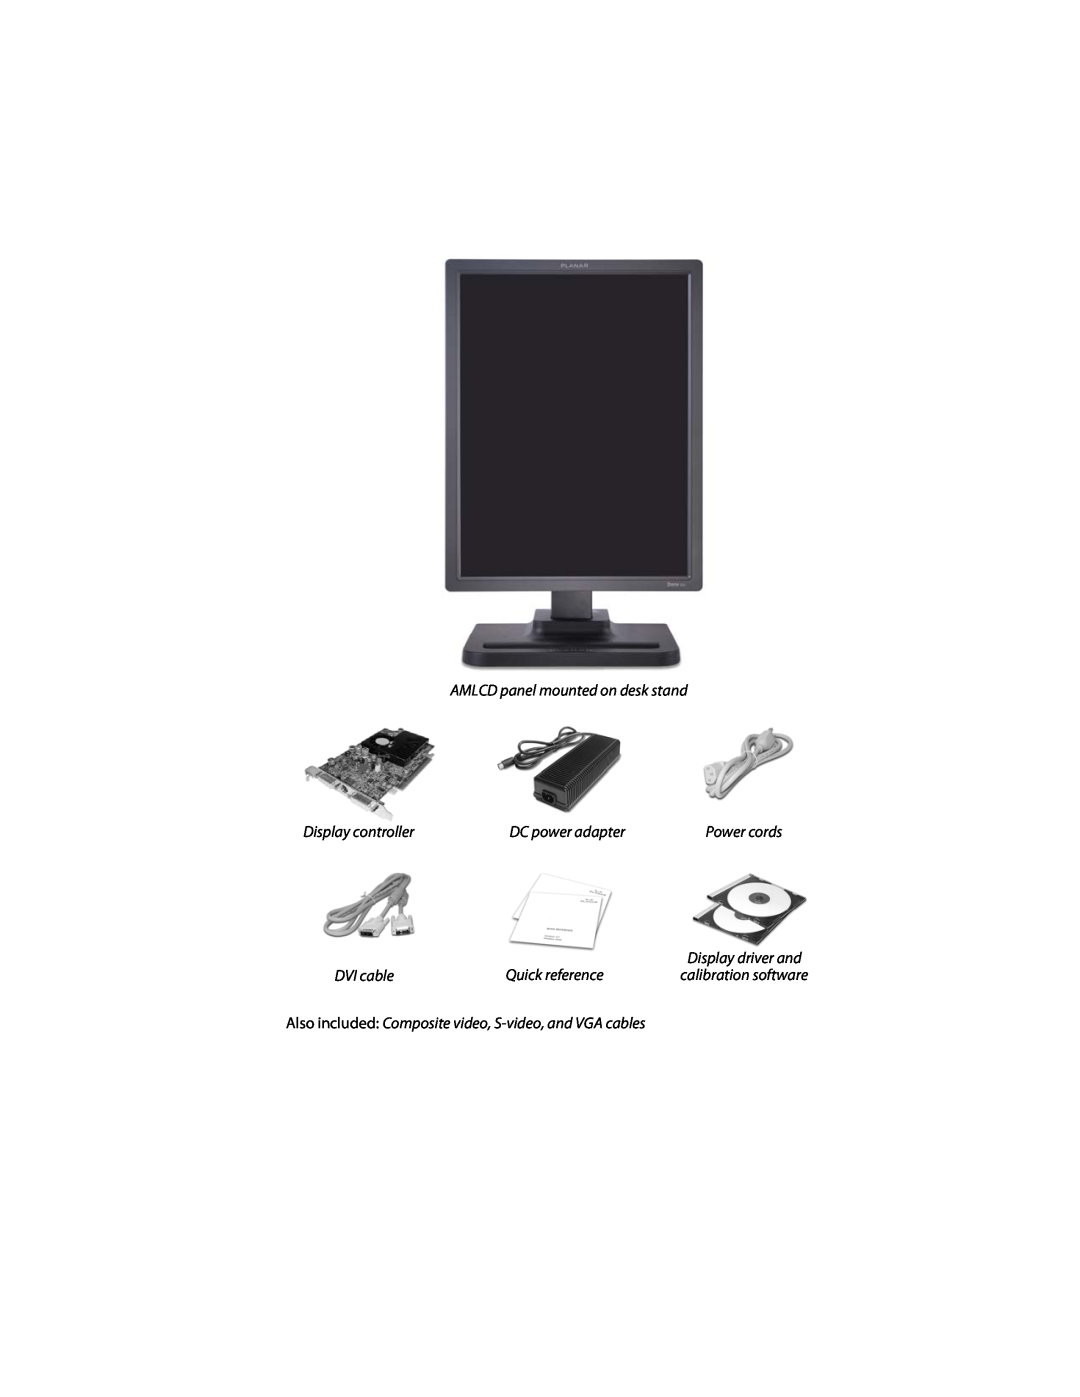 Planar E2c Display AMLCD panel mounted on desk stand, Display controller, DC power adapter, Quick reference, DVI cable 